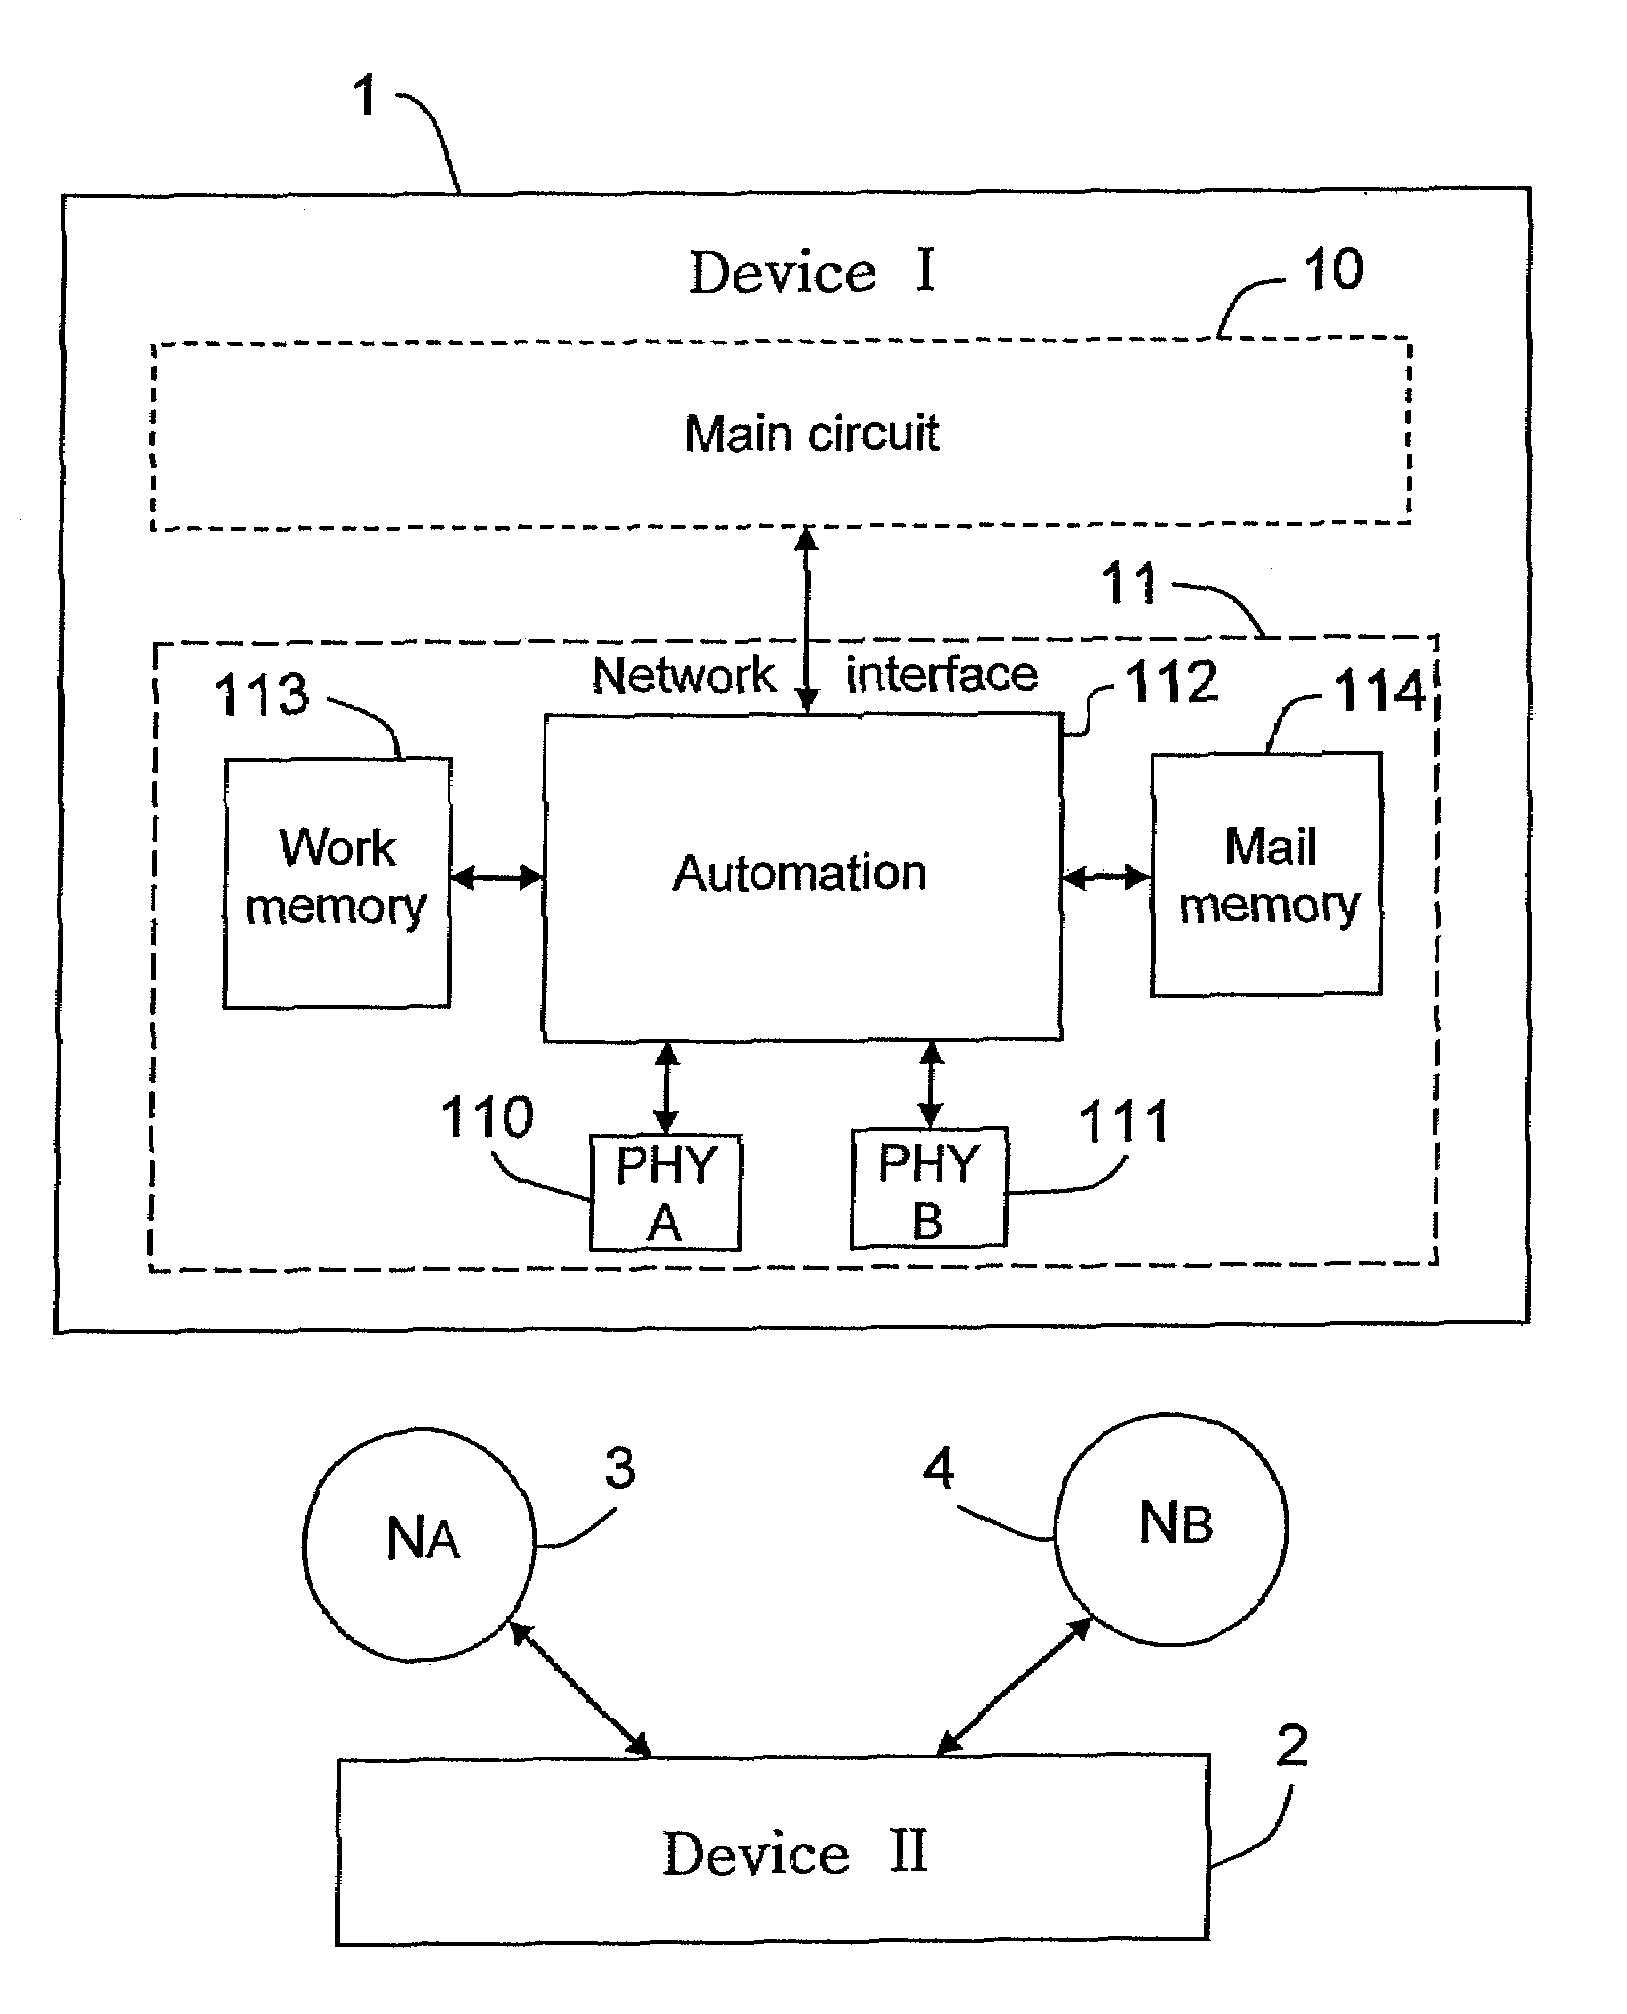 Apparatus for selecting and sorting packets from a packet data transmission network